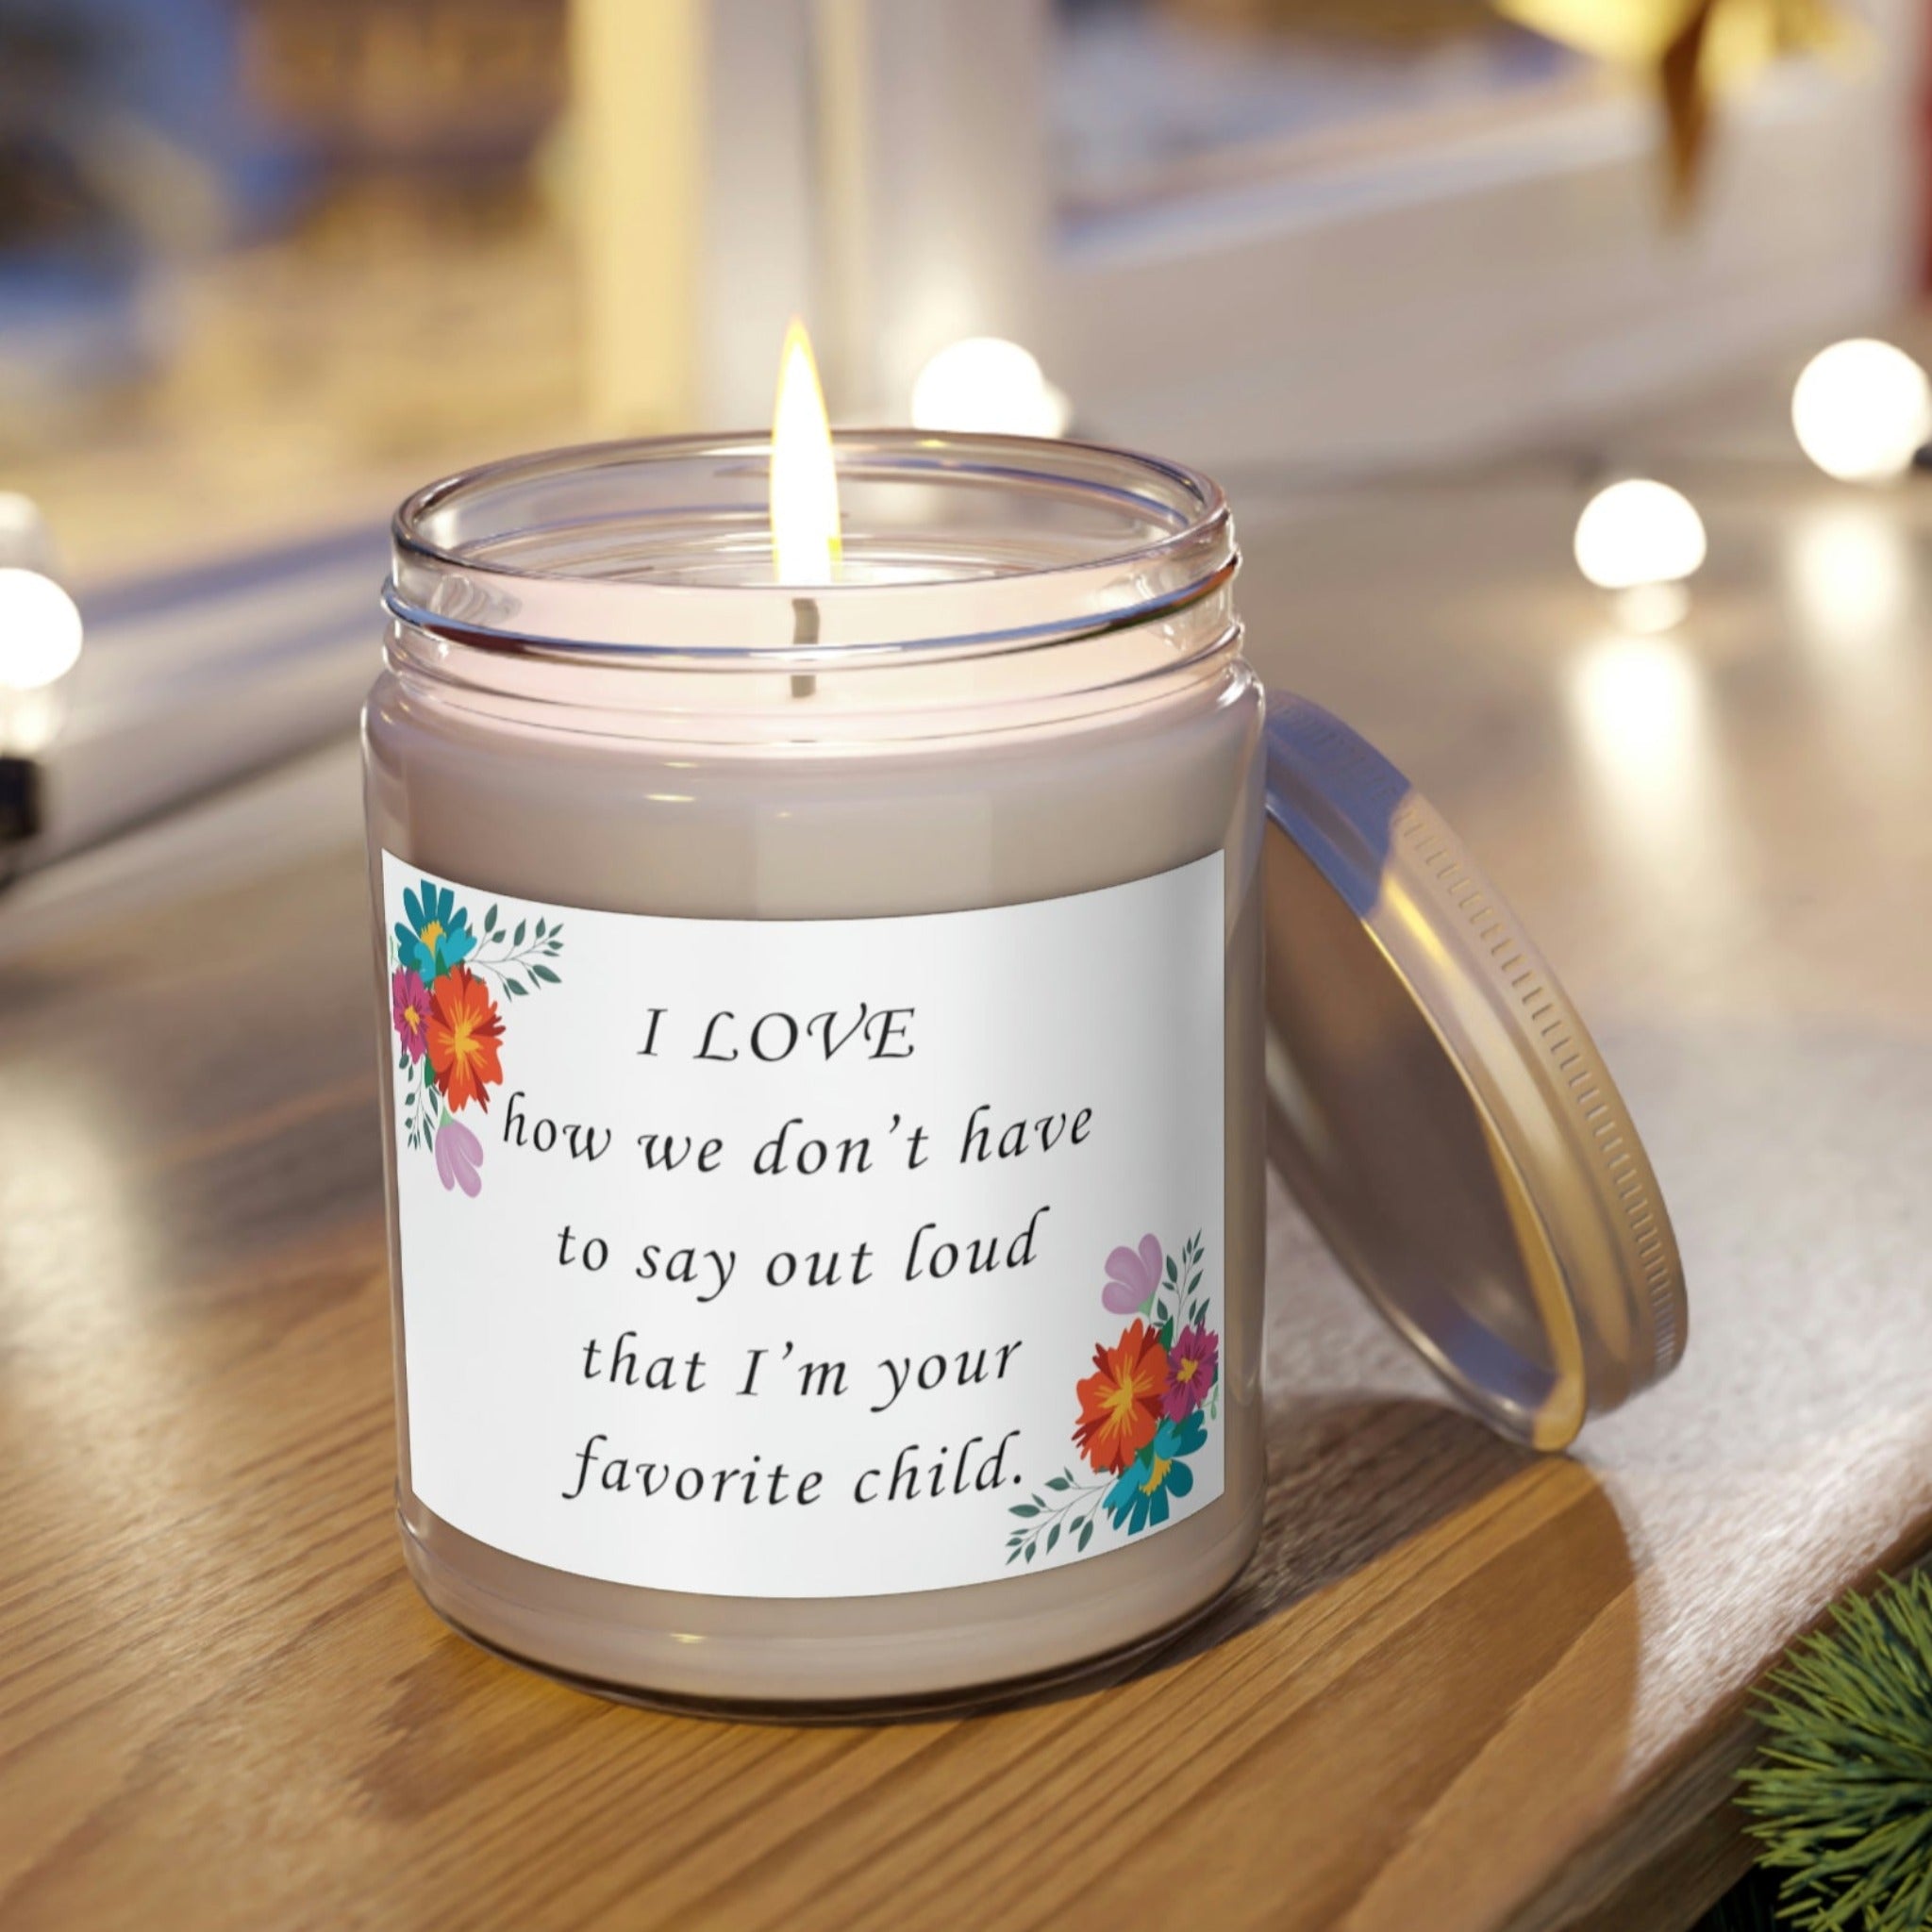 Favorite Child Scented Candle, Eco-Friendly Soy Wax, 9oz sitting on shelf with open lid and lit flame.